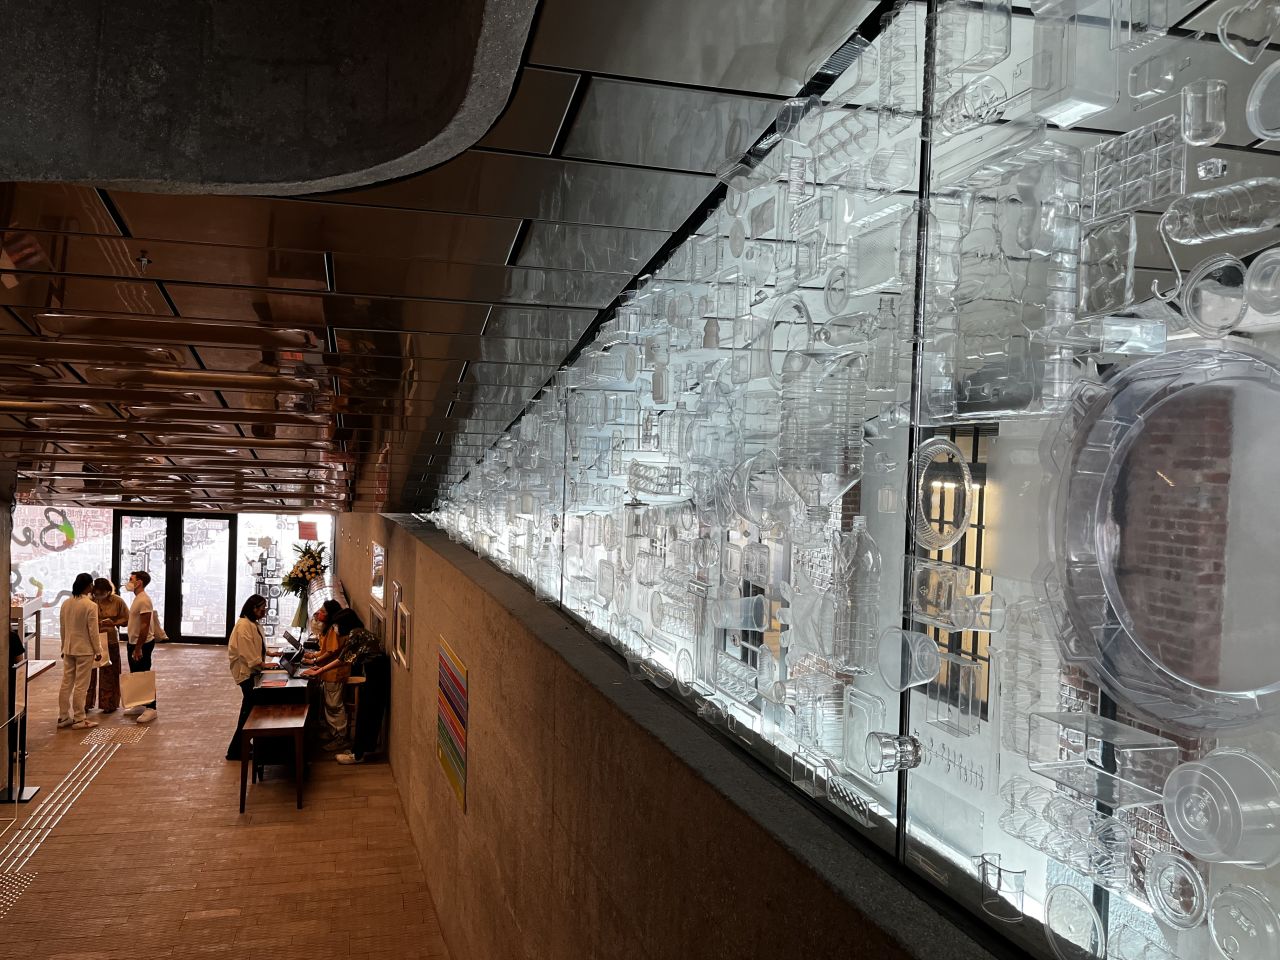 In the lobby, "The Innocent Collection" uses plastic bottles (which Rist calls "instant diamonds") to decorate the entrance doors and windows, questioning perceptions of waste and environmental issues. 